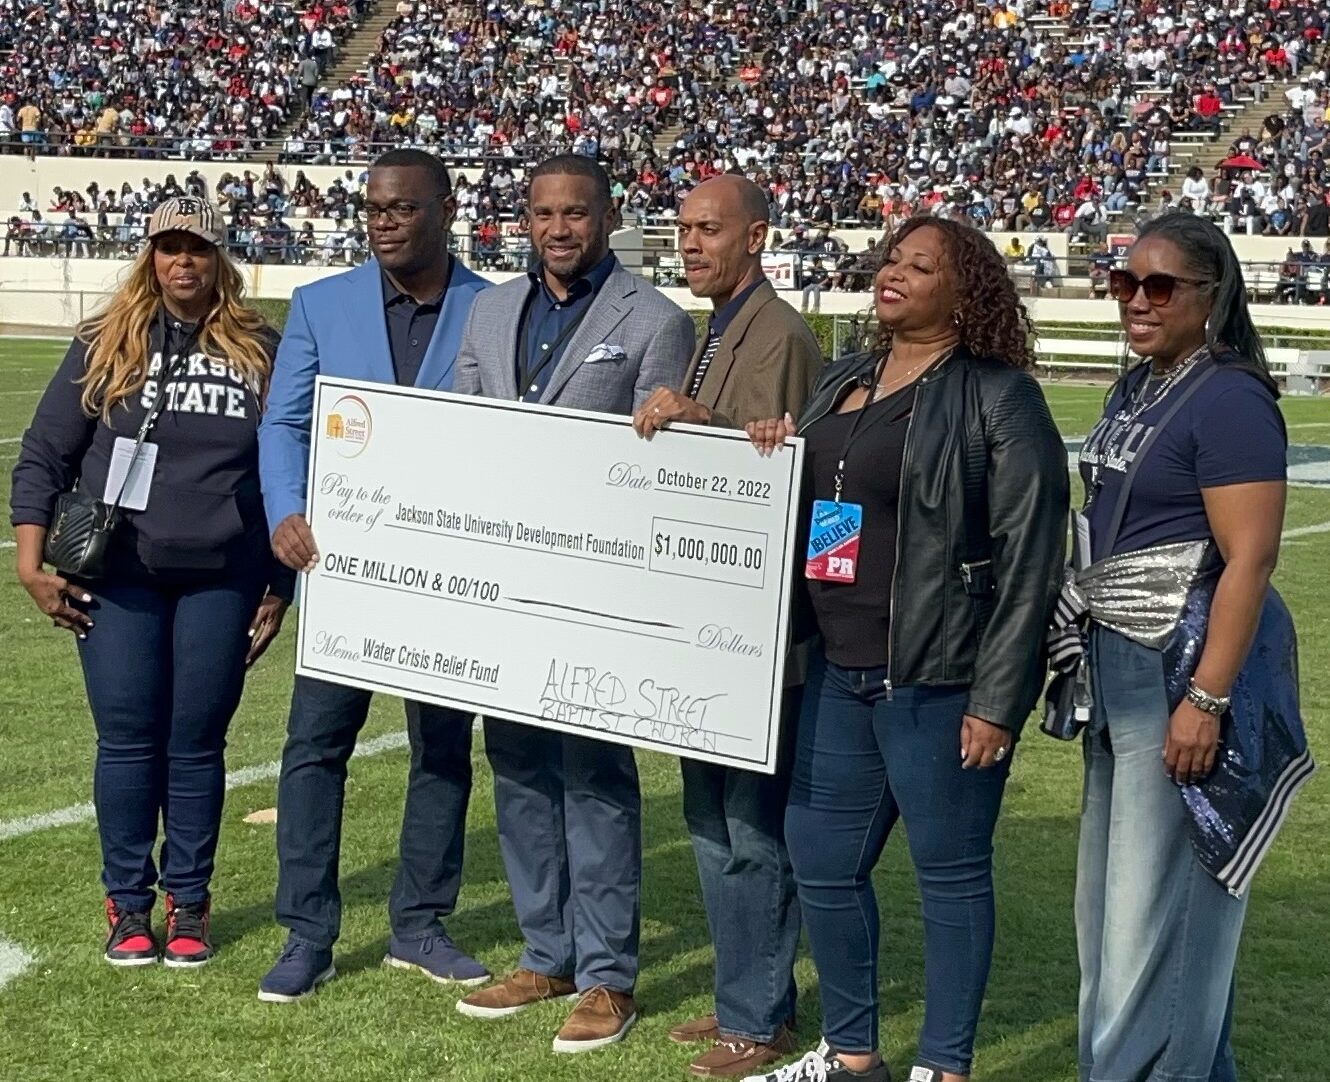 Representatives form Jackson State University and Alfred Street Baptist stand on the turf during a football game holding a large check.